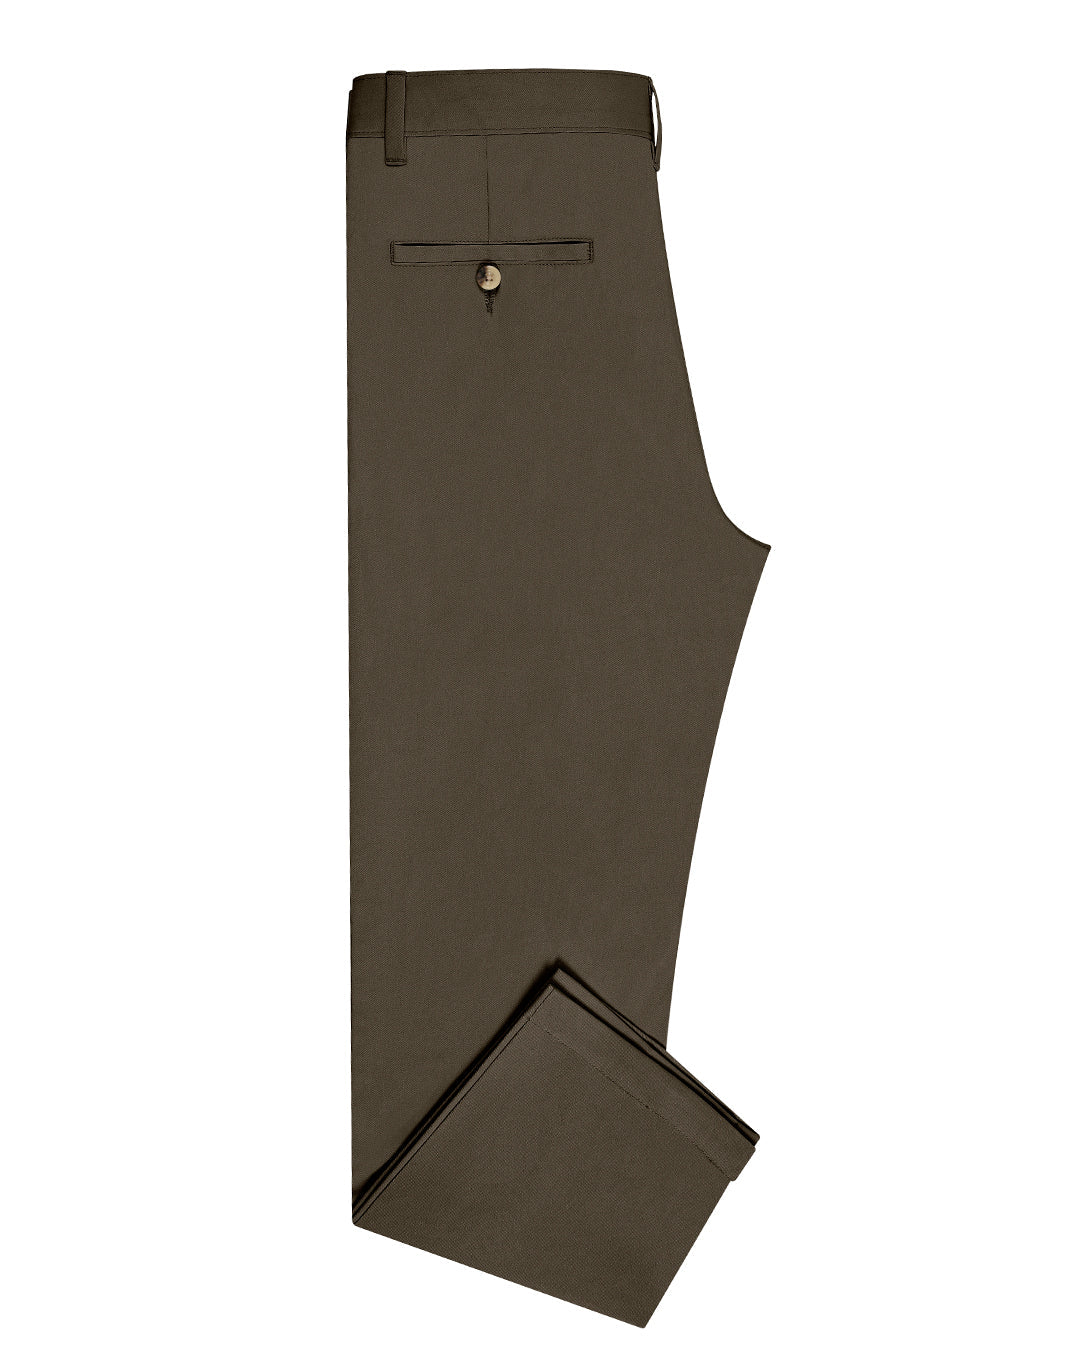 Side view of custom Genoa Chino pants for men by Luxire in khaki brown